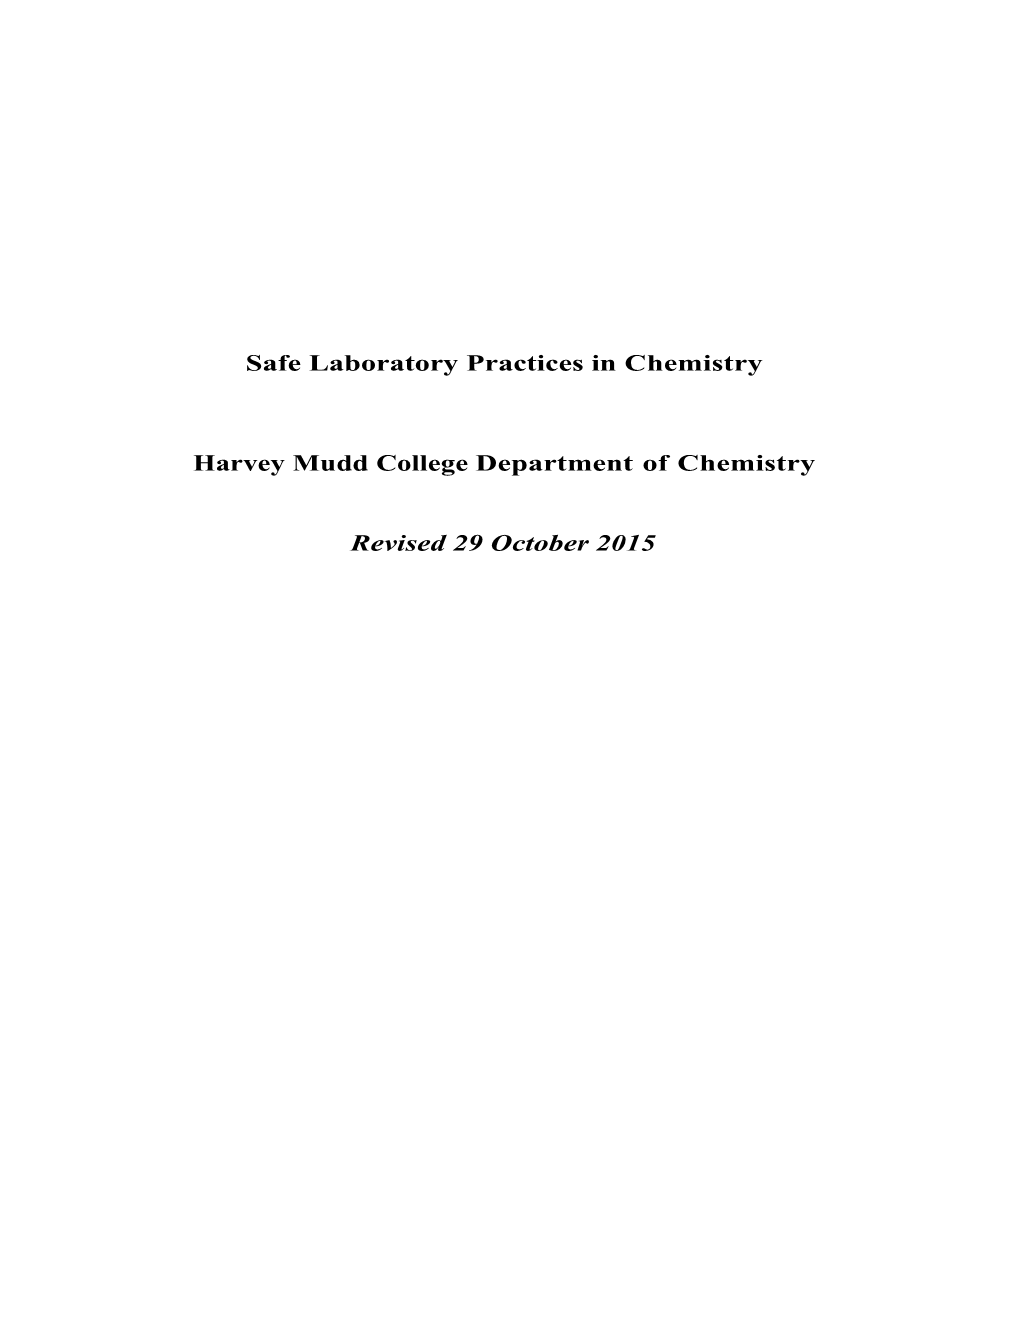 Safe Practices in Chemistry